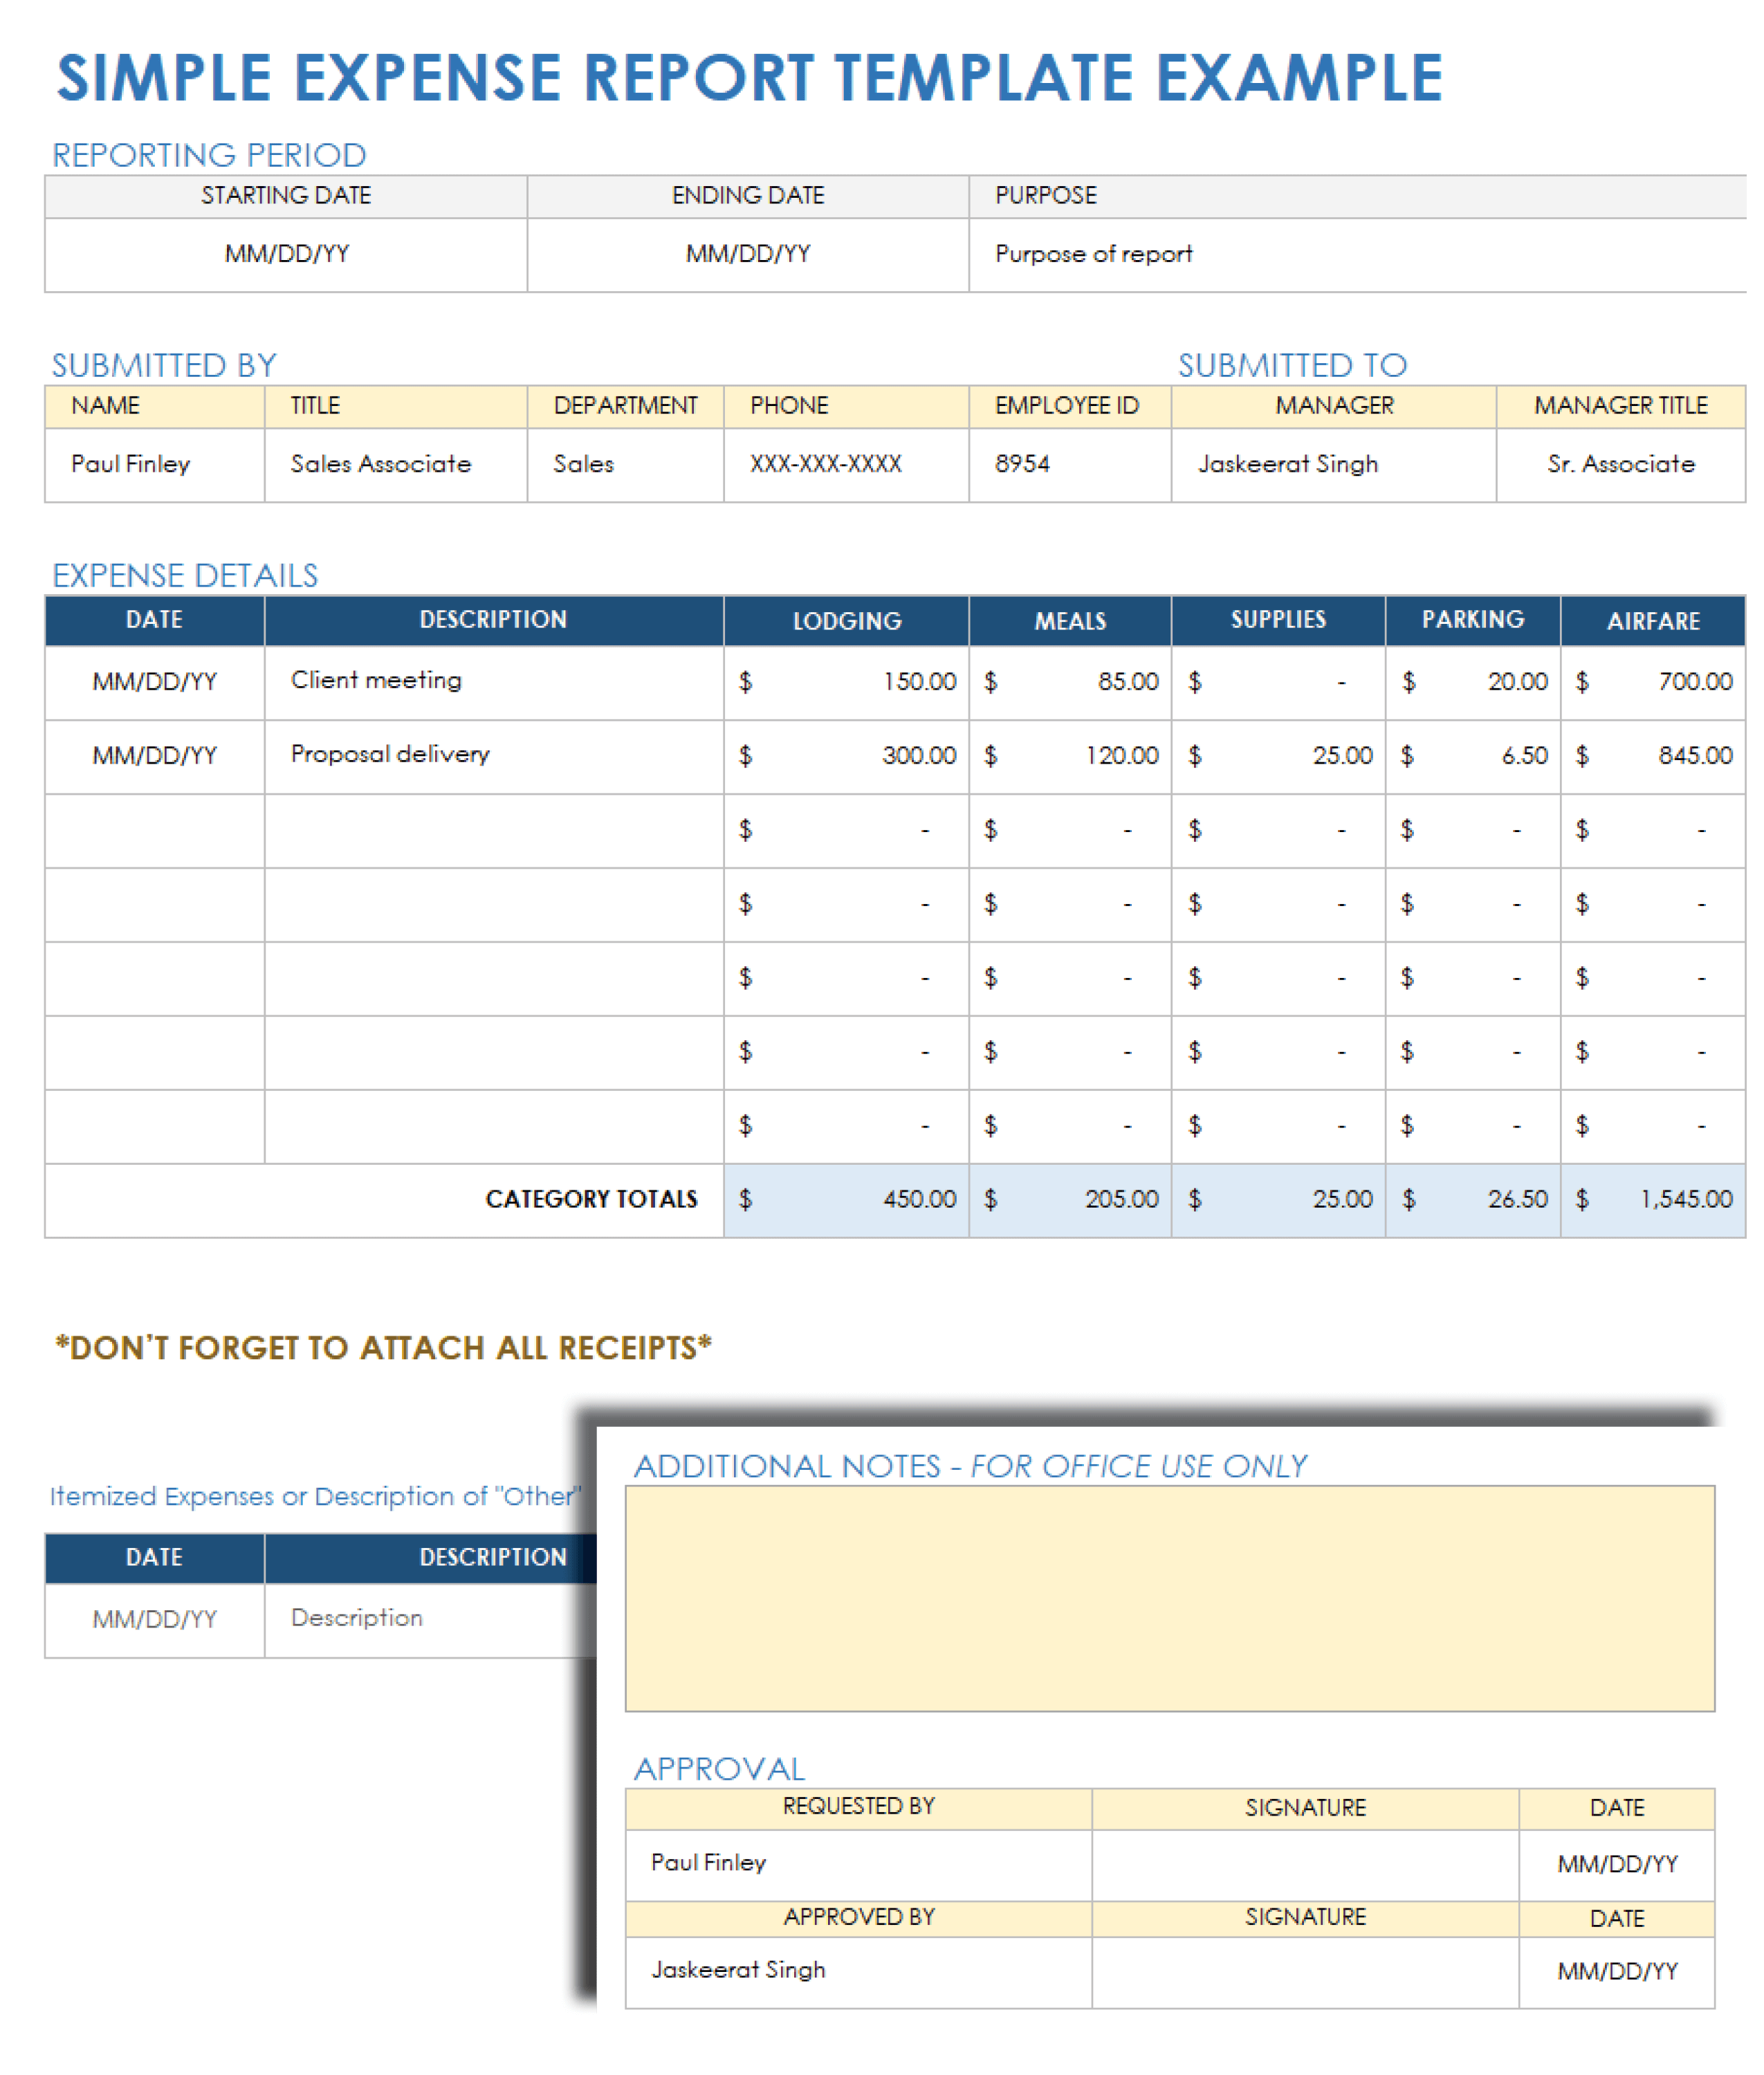 Simple Expense Report Template Example